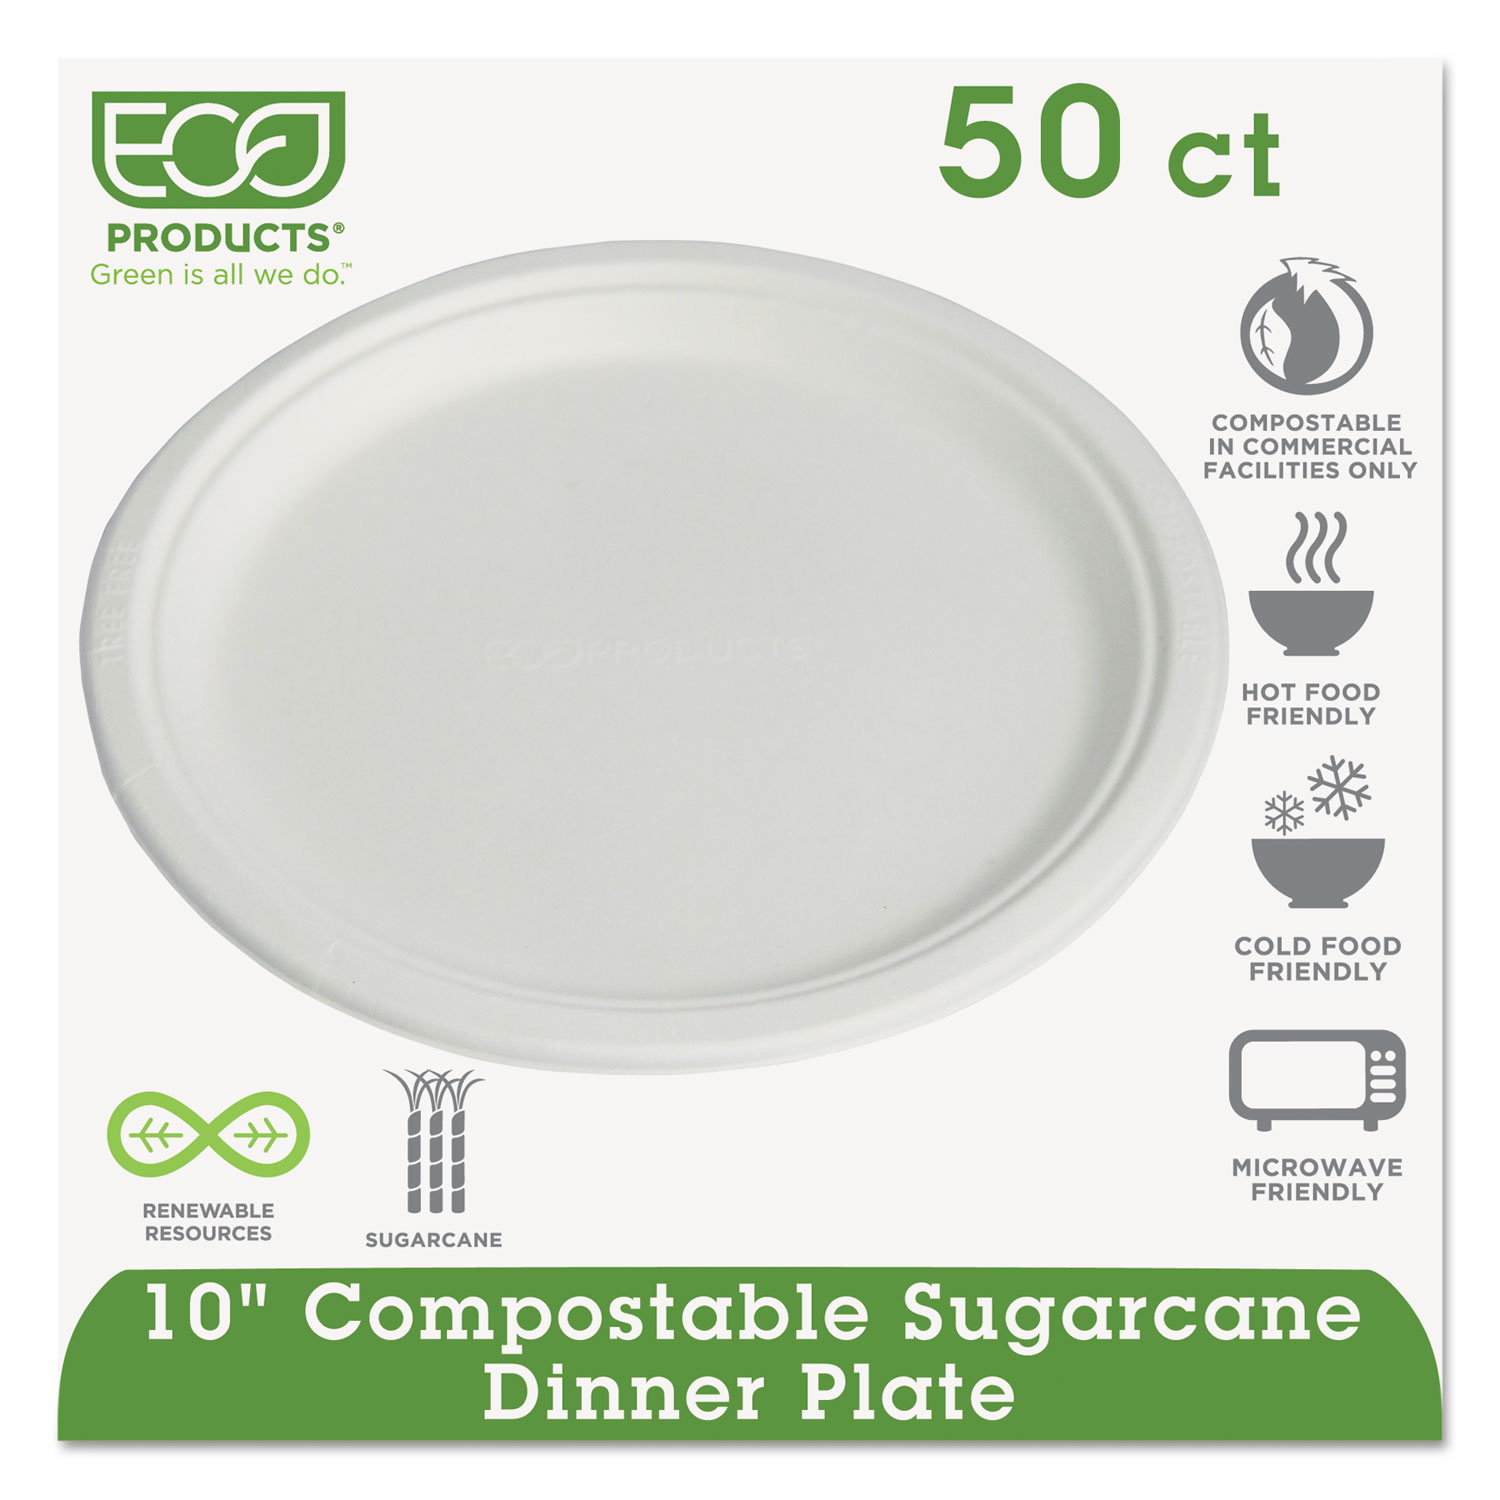  Eco-Products EP-P005PK Compostable Sugarcane Dinnerware, 10 Plate, Natural White, 50/Pack (ECOEPP005PK) 